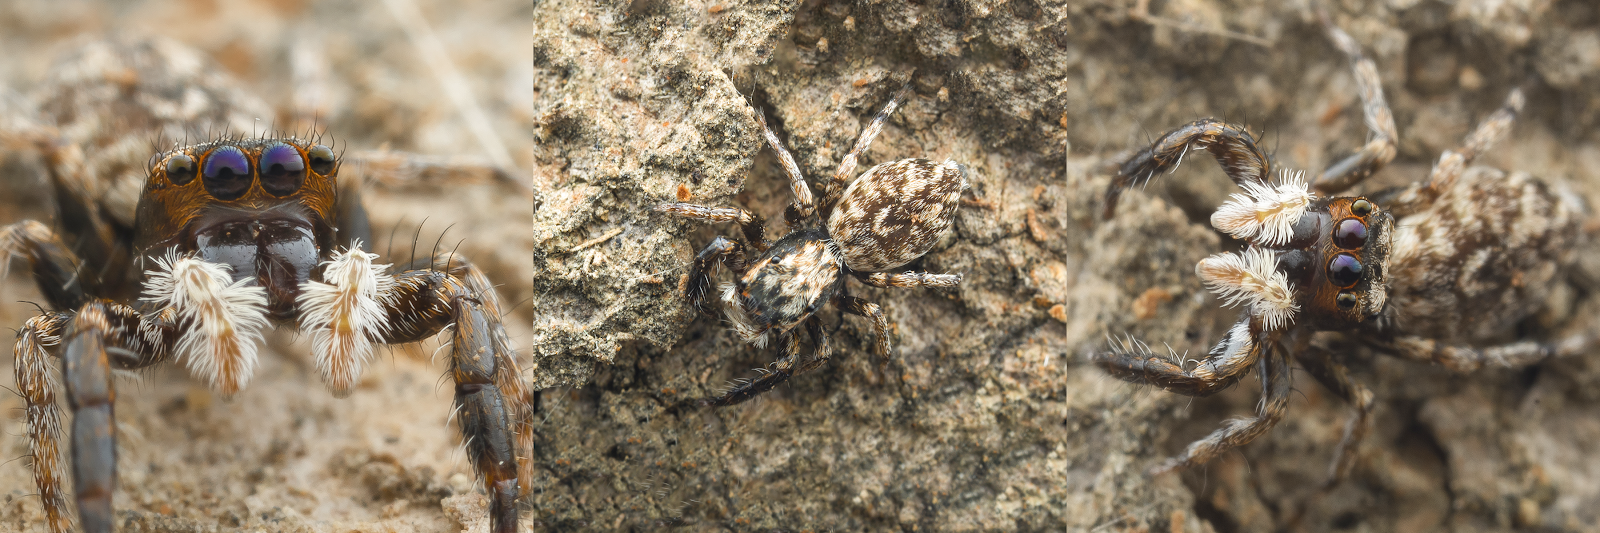 A trunk-dwelling jumping spider blending into the bark of a tree